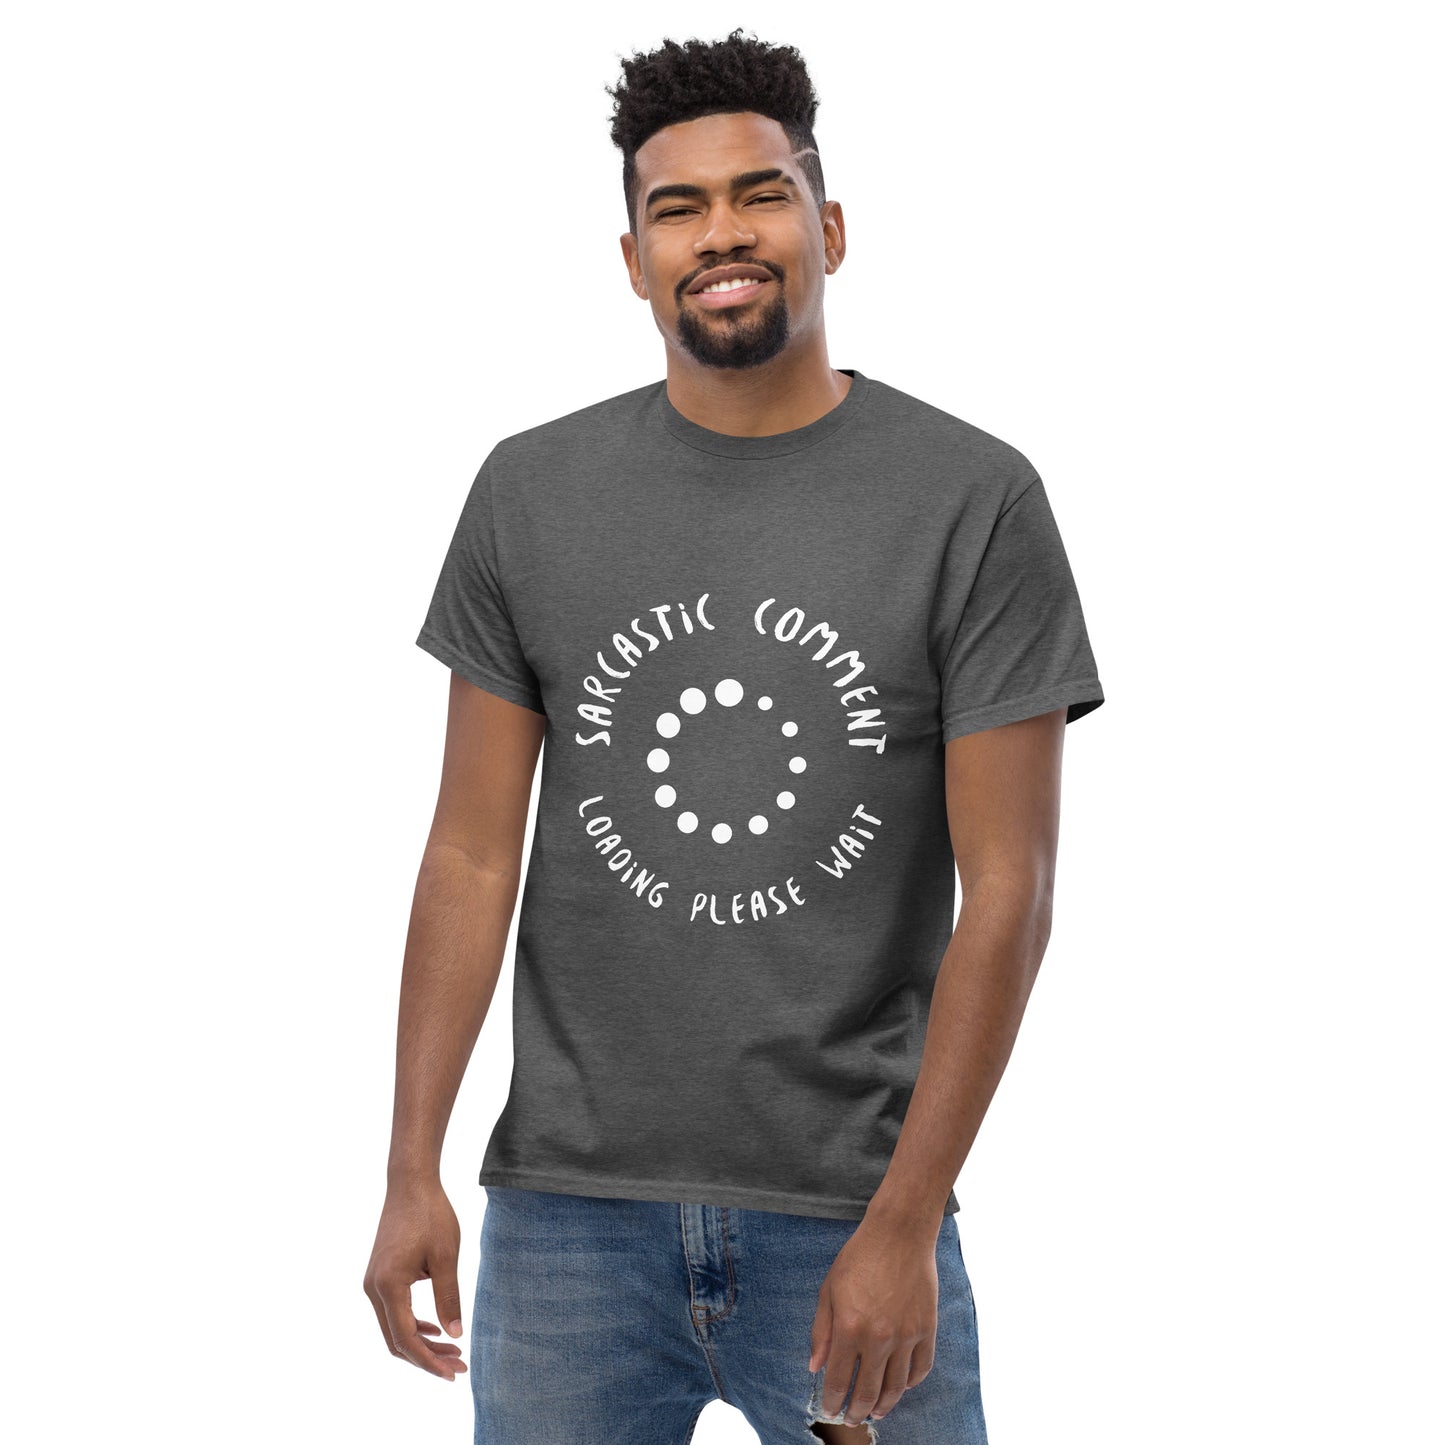 Men with Dark heather T-shirt with the text in a circle "Sarcastic comment loading please wait"